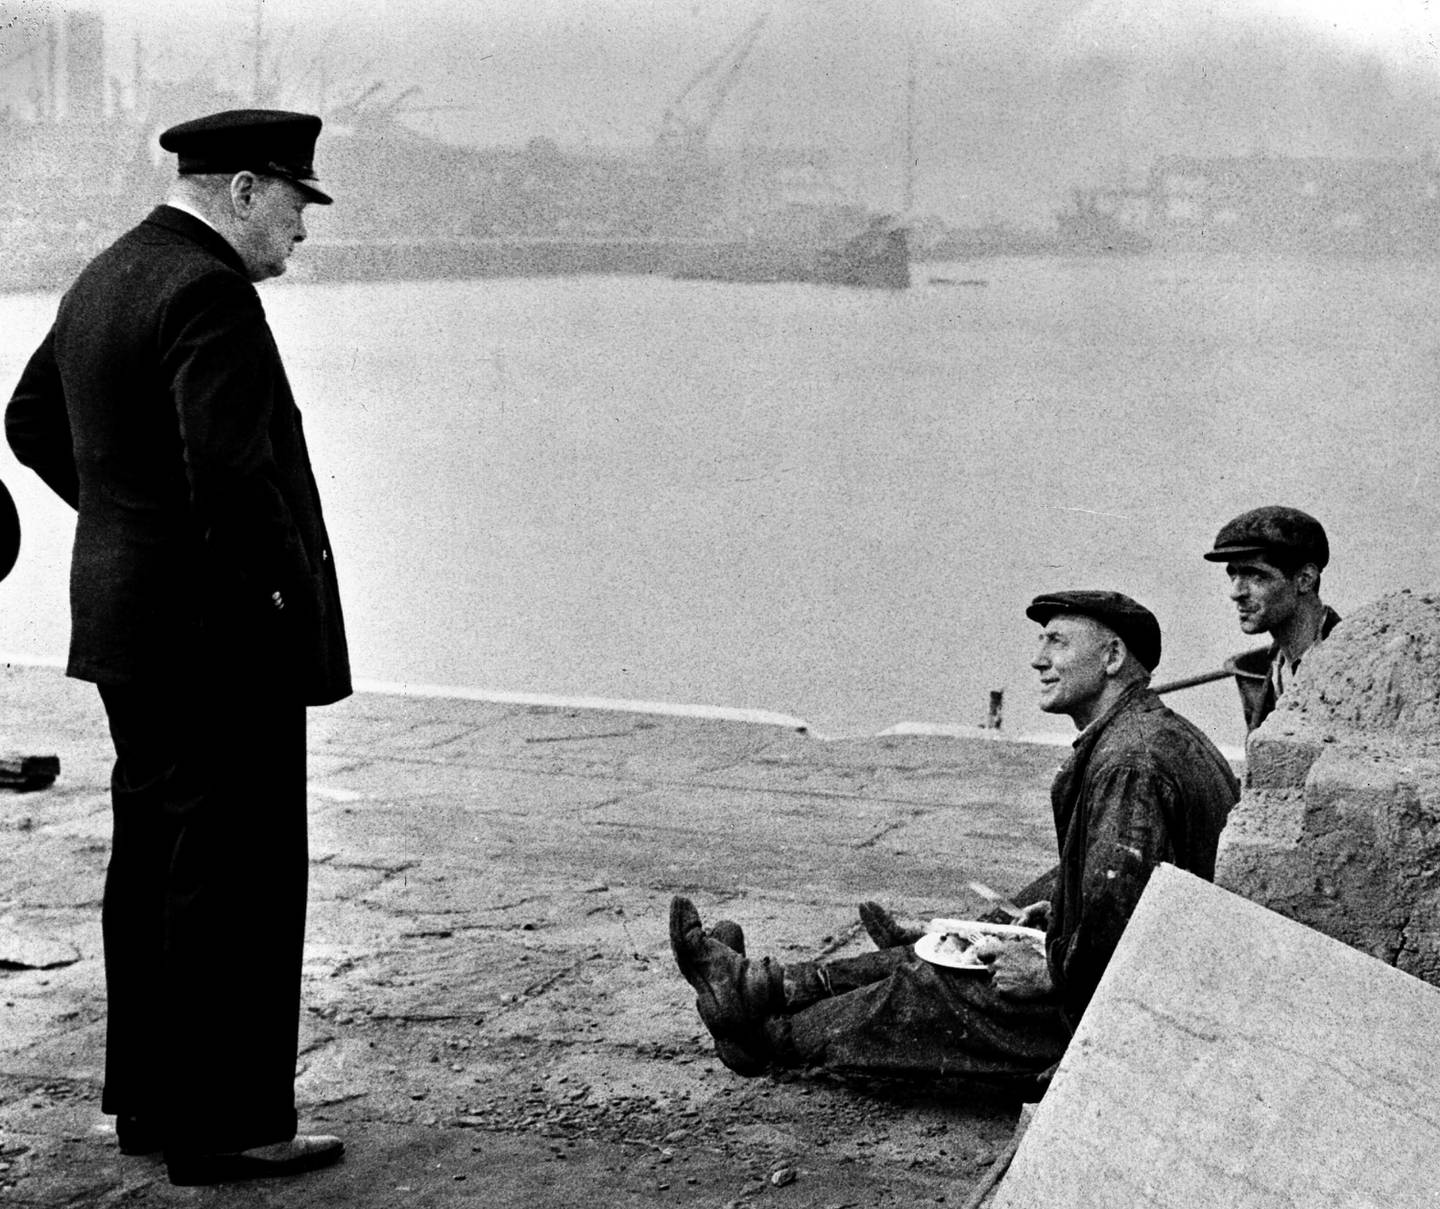 Britain's Prime Minister Winston Churchill, left, speaks to two workmen eating their lunch, in England, in September 1941, while touring a docks area. Upon seeing their well-filled plates, Churchill asked 